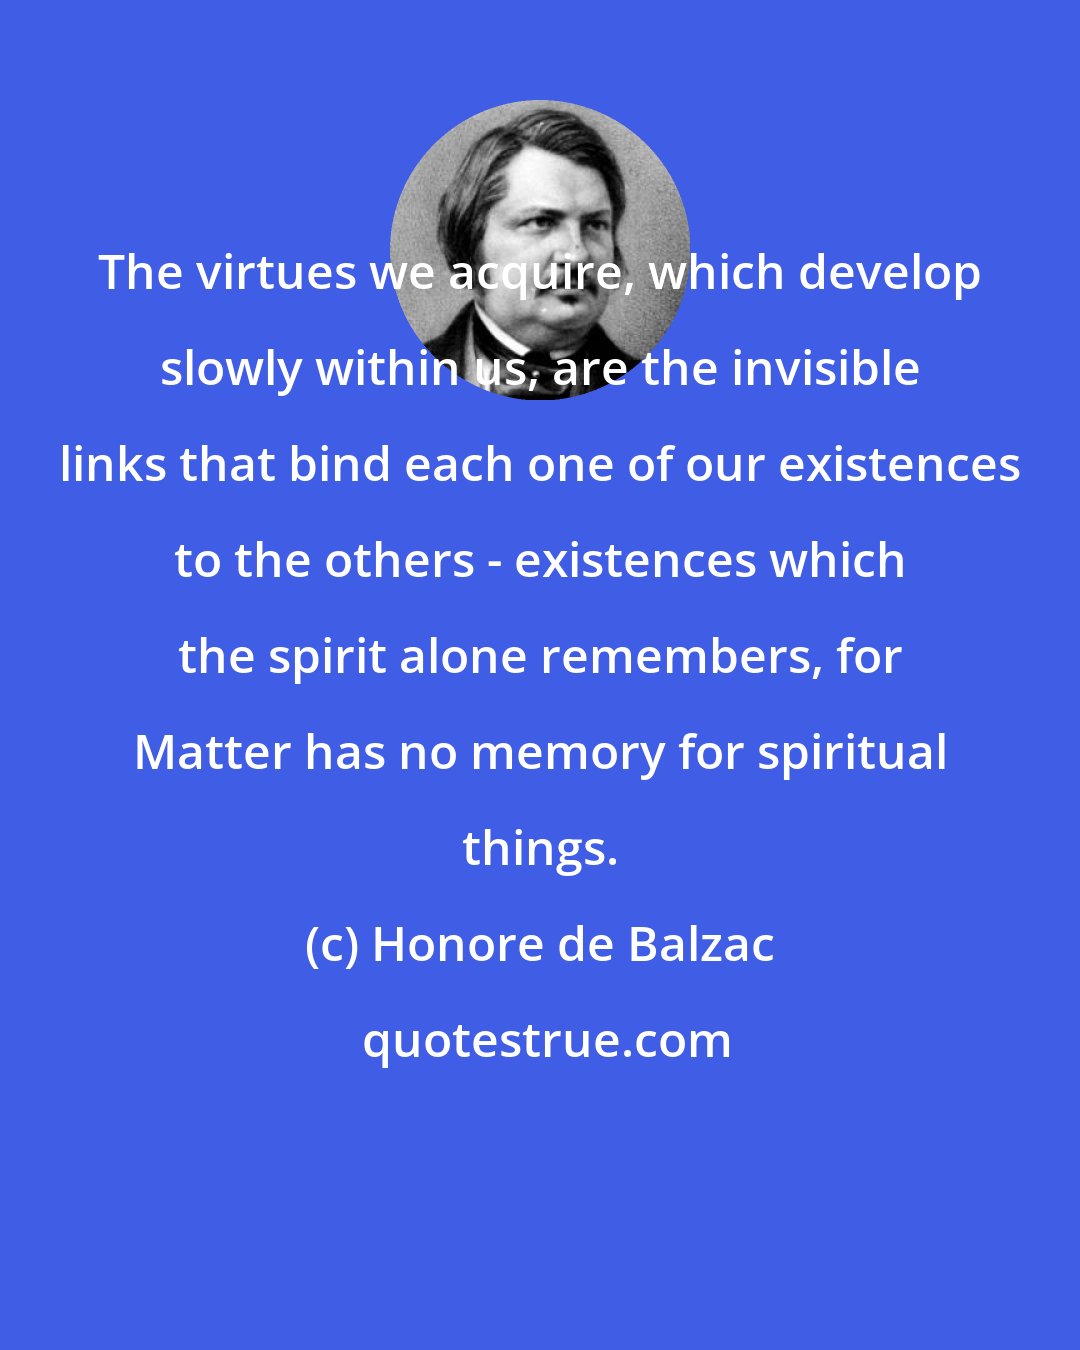 Honore de Balzac: The virtues we acquire, which develop slowly within us, are the invisible links that bind each one of our existences to the others - existences which the spirit alone remembers, for Matter has no memory for spiritual things.